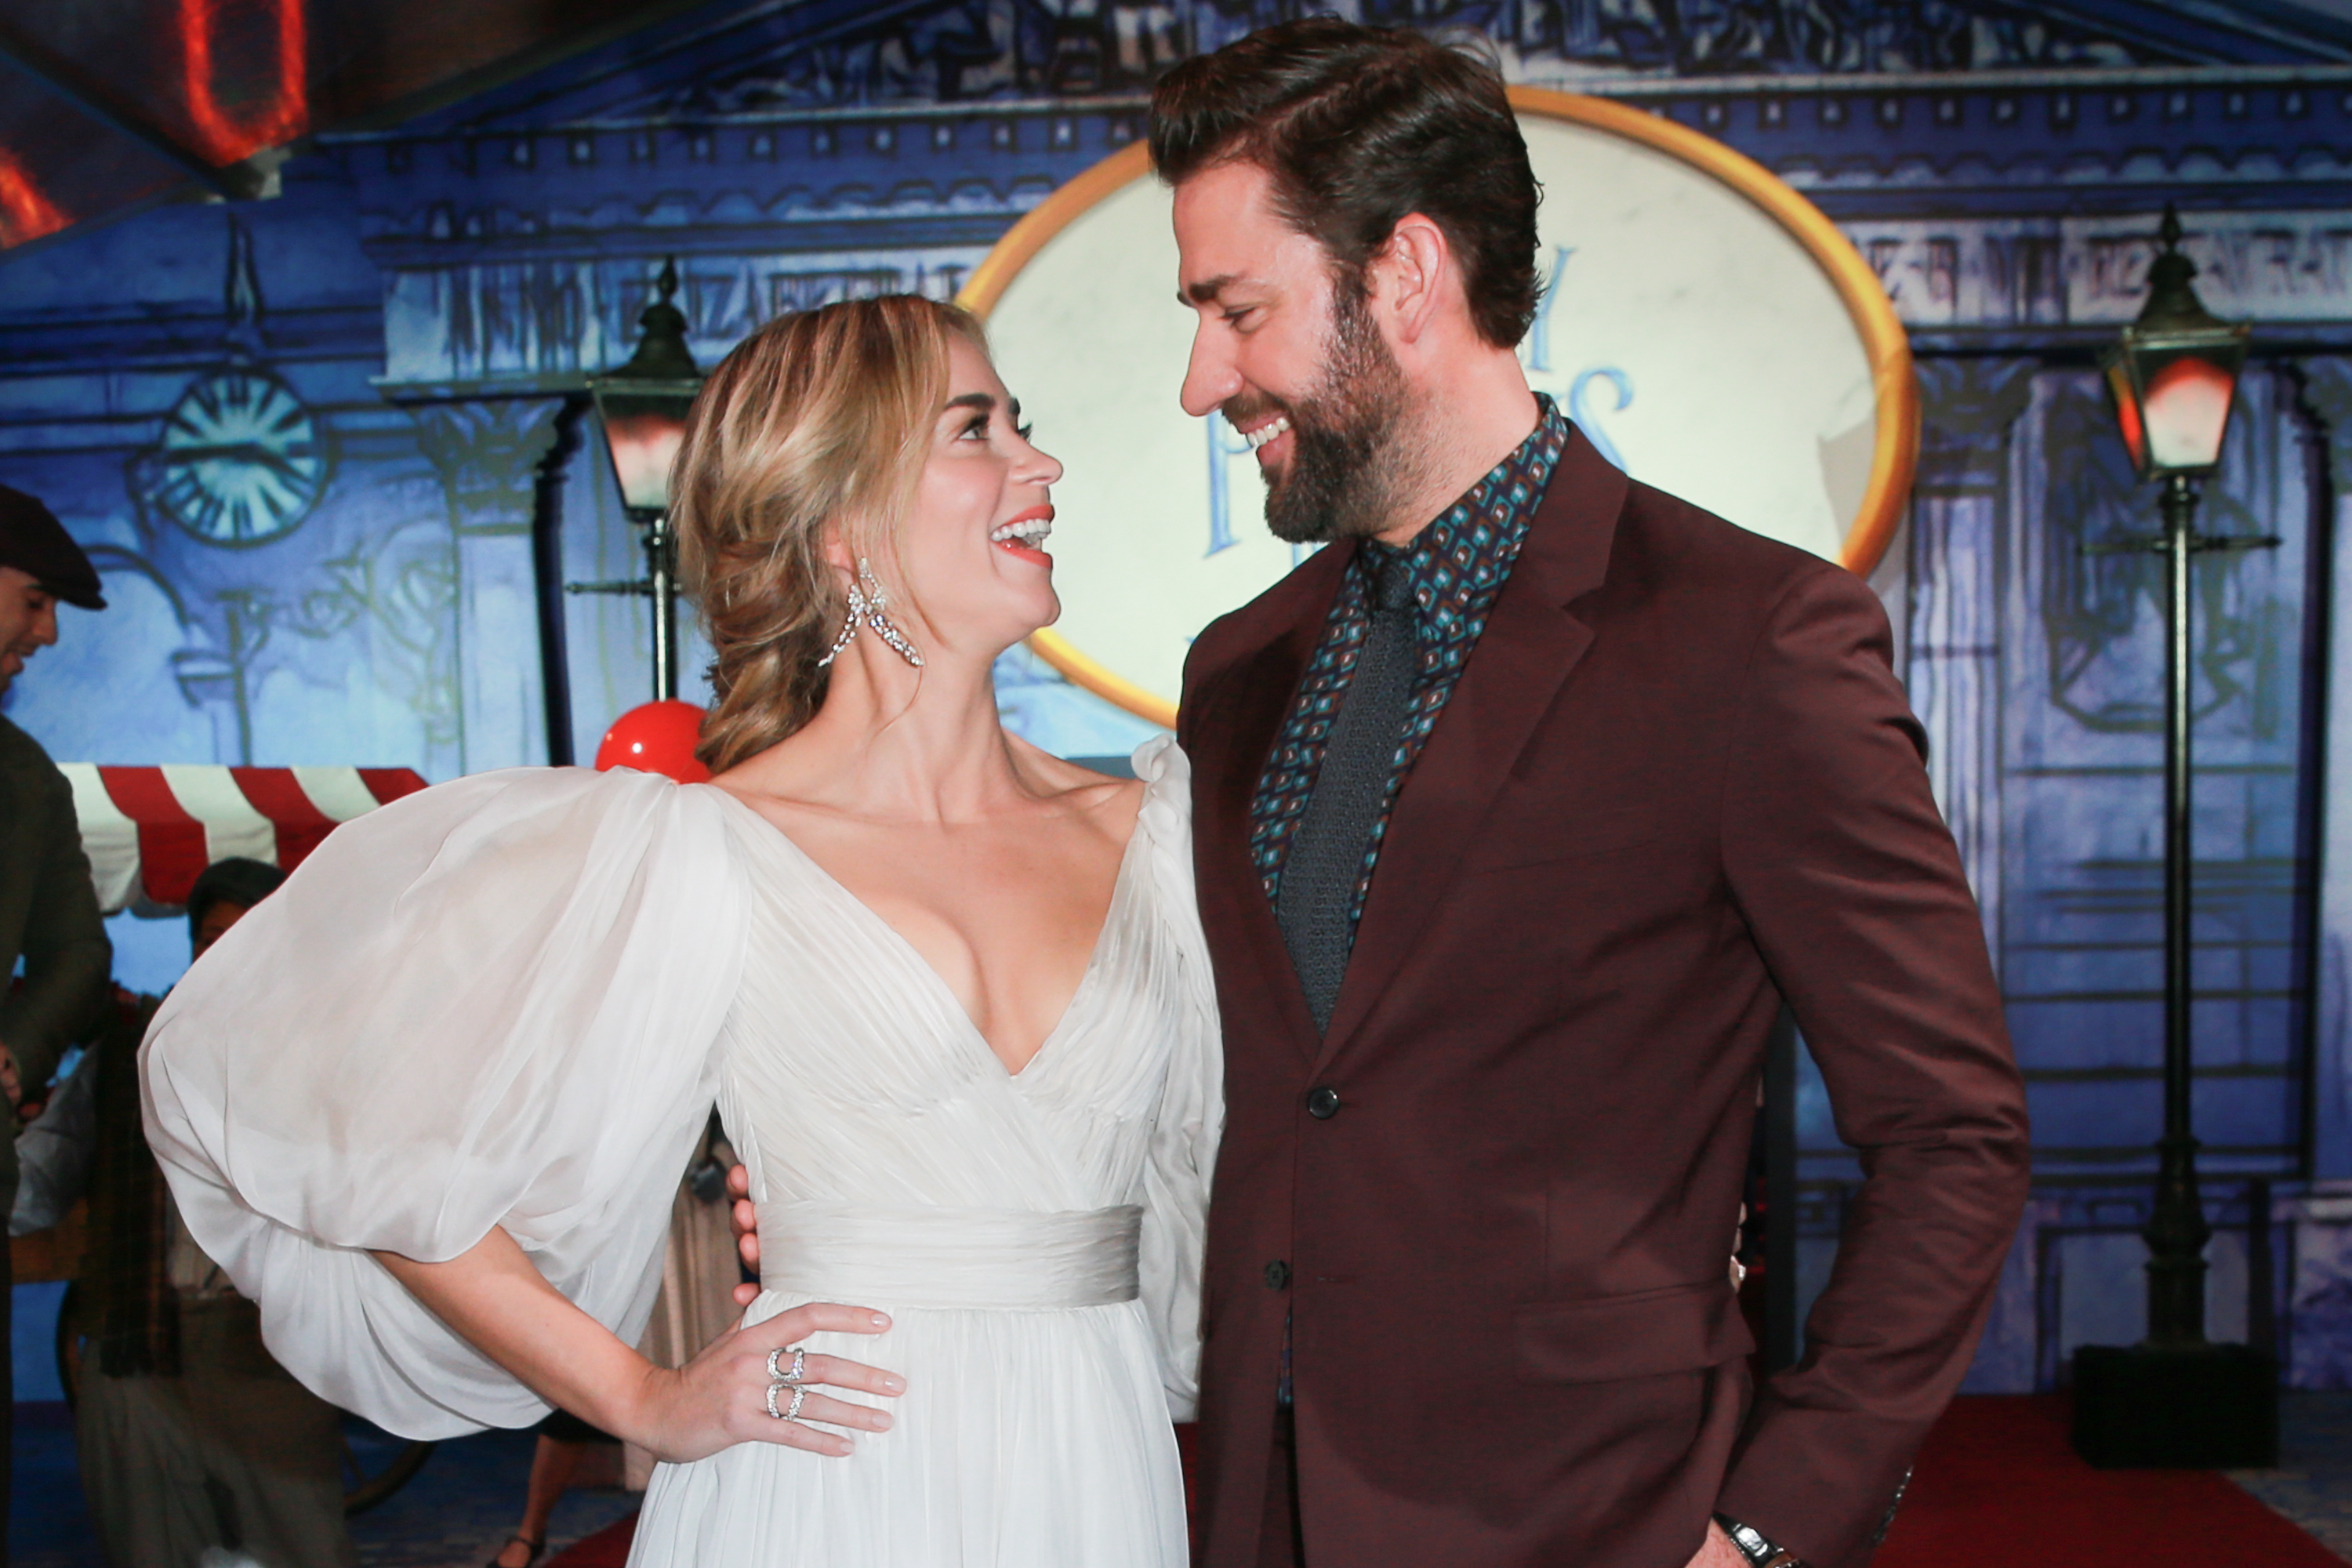 Emily Blunt (L) and John Krasinski attend the Premiere Of Disney's 'Mary Poppins Returns' at El Capitan Theatre on November 29, 2018 in Los Angeles, California. (Rich Fury—Getty Images)